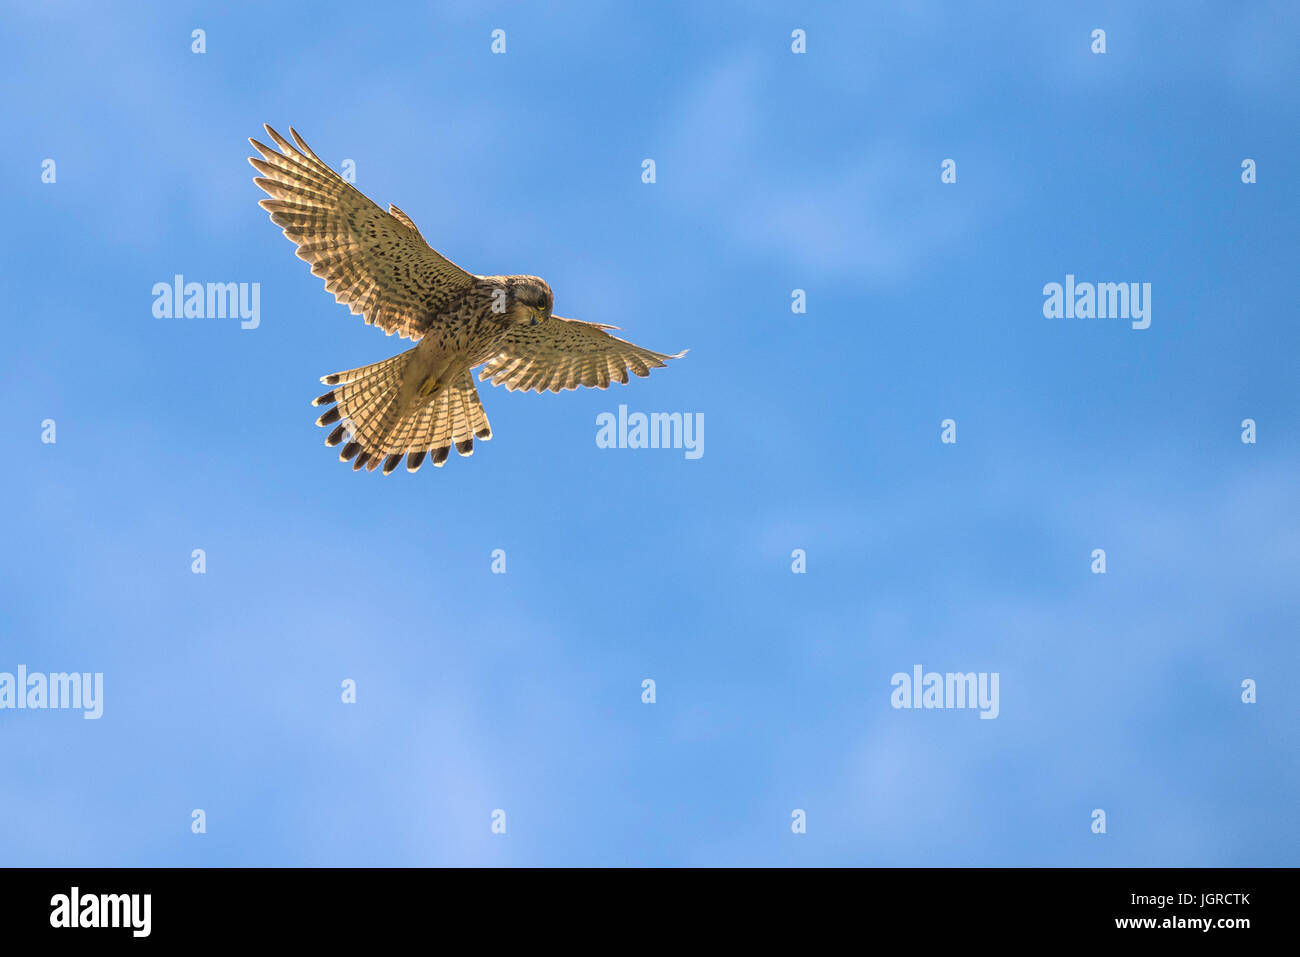 A Kestrel hovering and searching for prey. Stock Photo